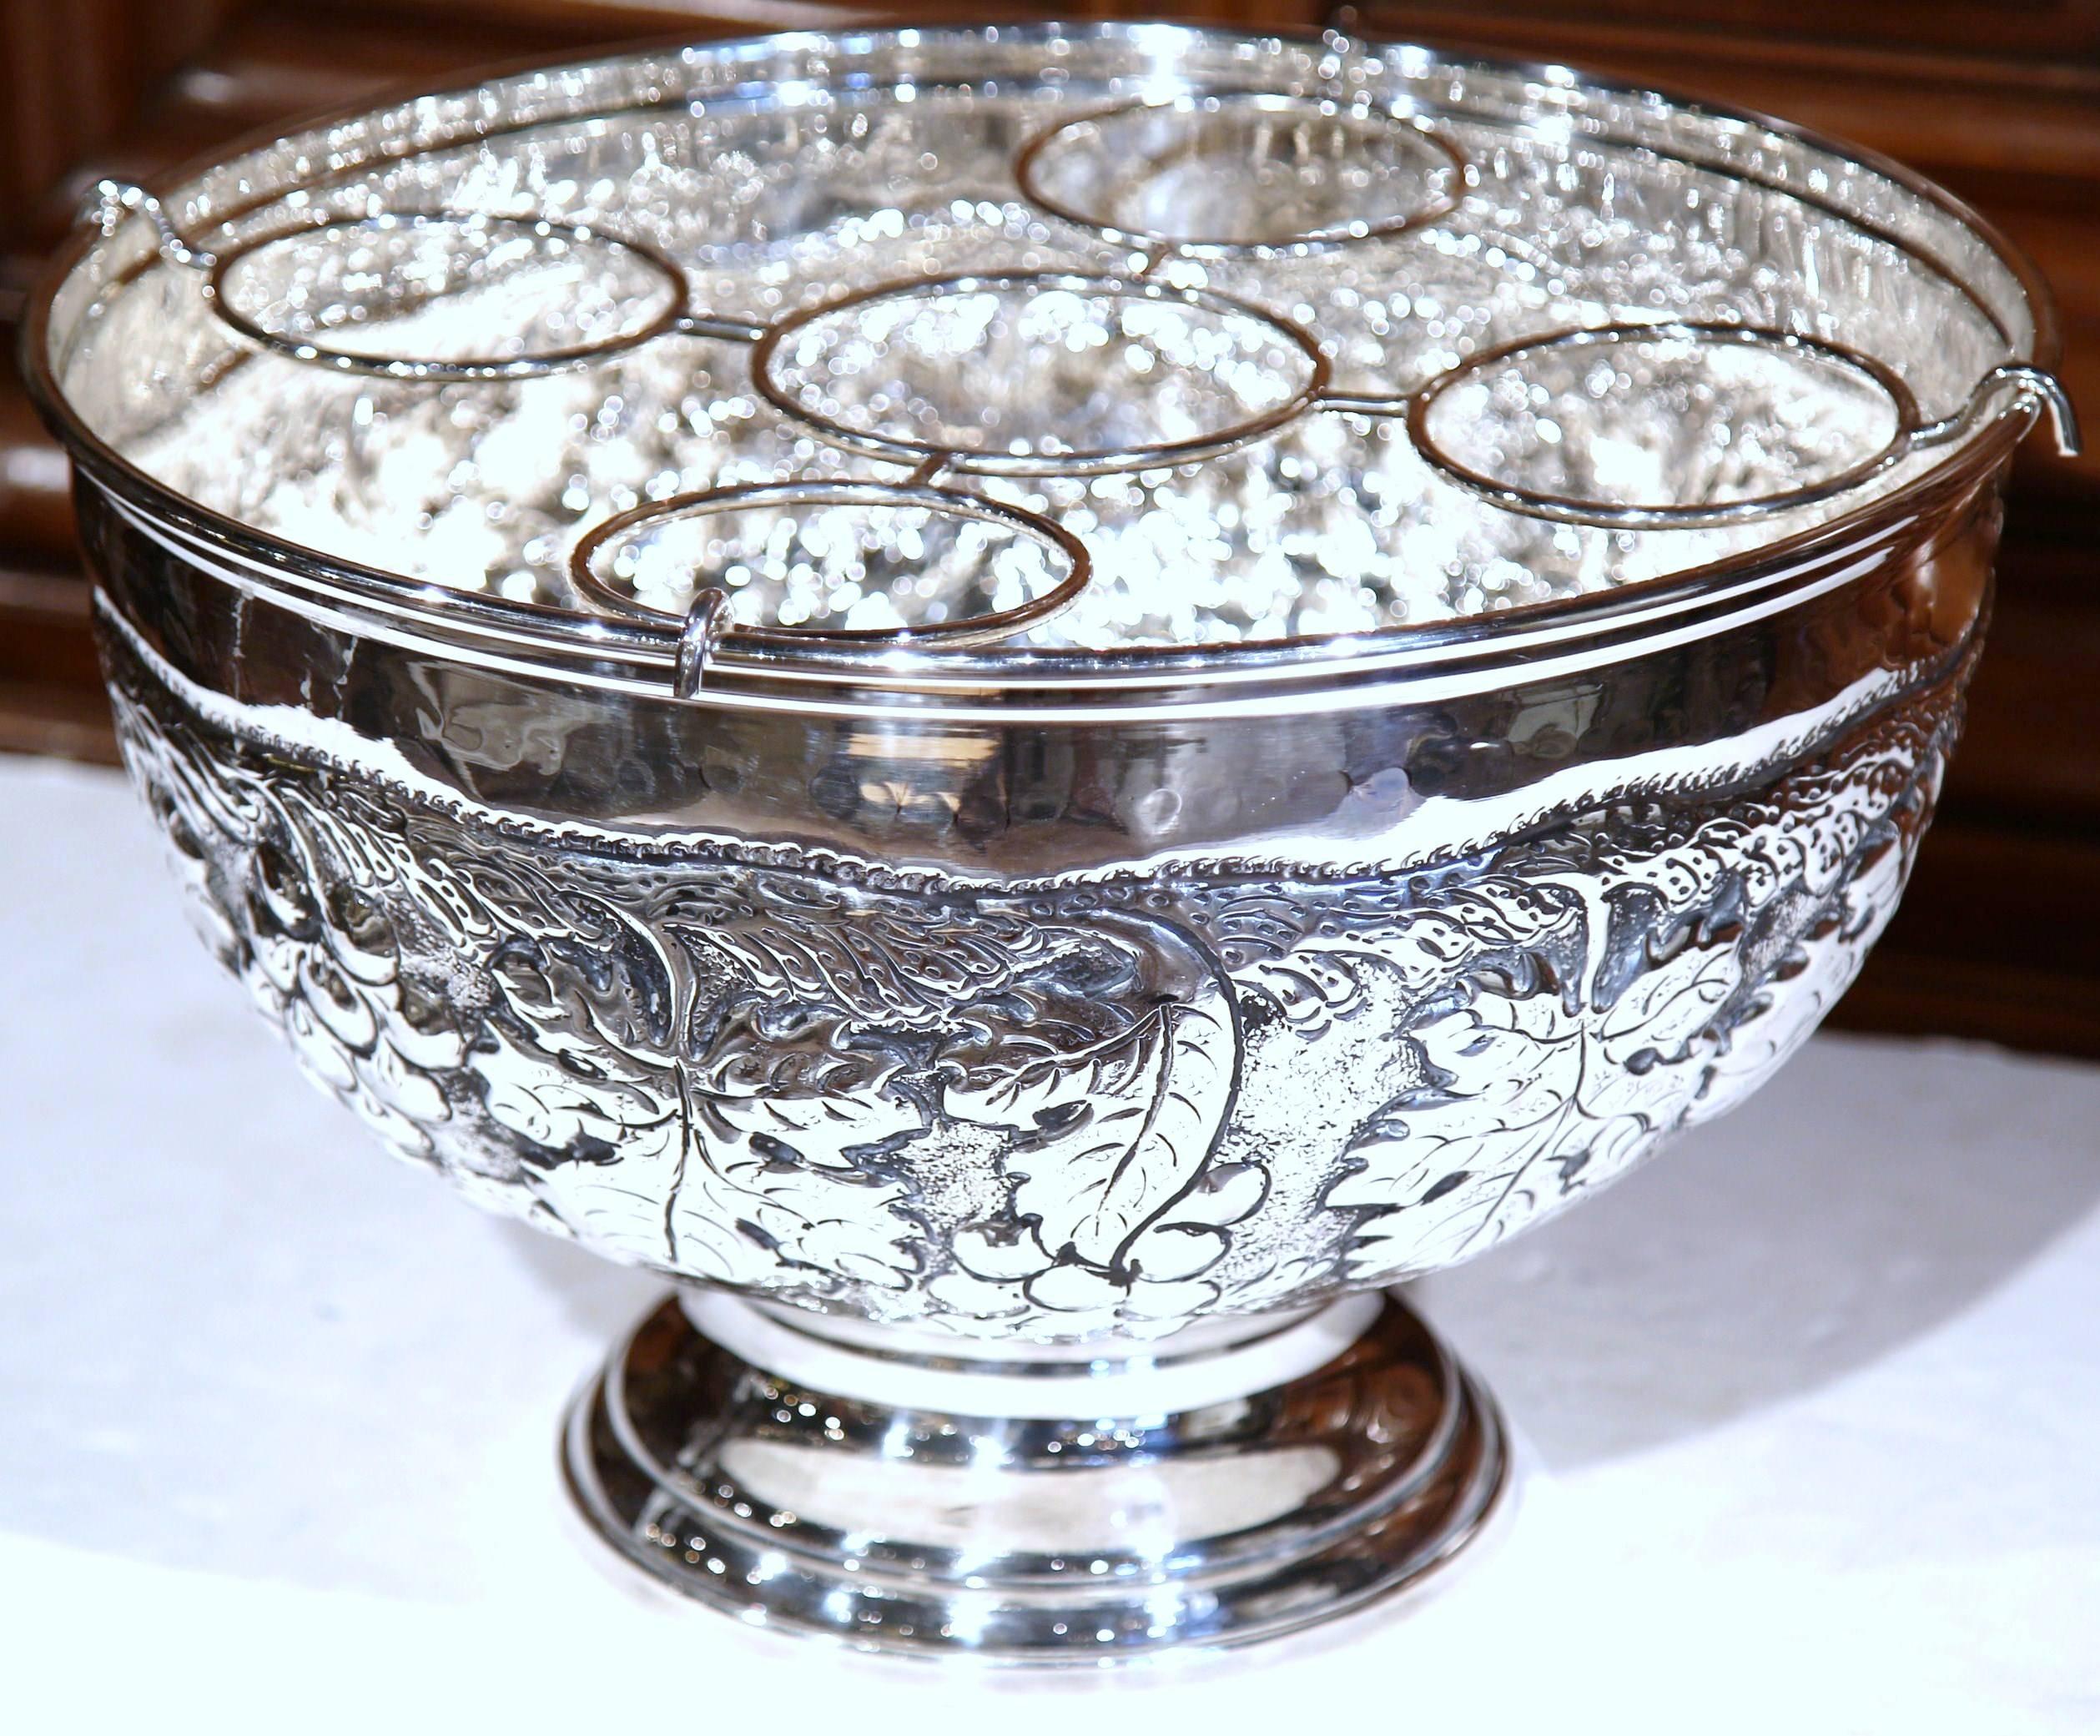 Keep your wine or champagne chilled in style with this elegant round bucket from France. The outside features intricate repousse decorative motifs of grapes and vines. Inside the bucket, two removable trays will hold up to five bottles. This silver